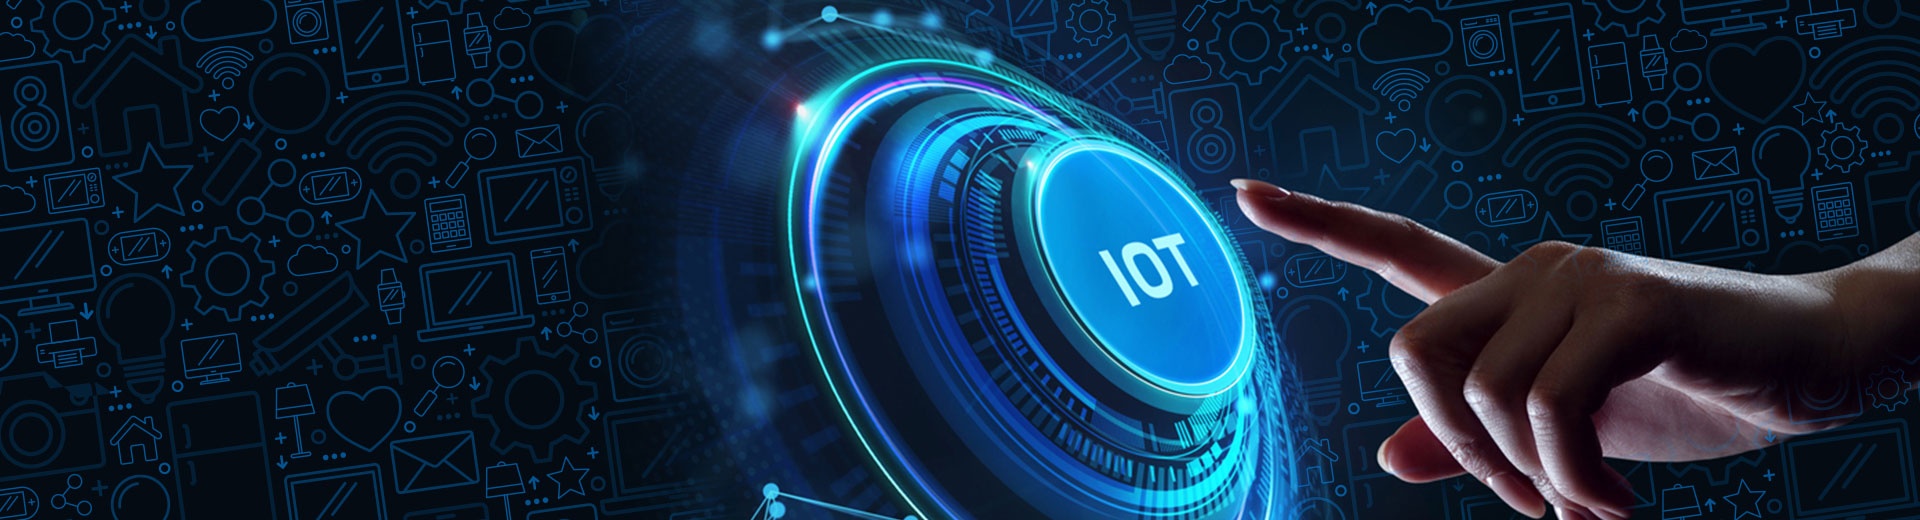 What is IoT all about?